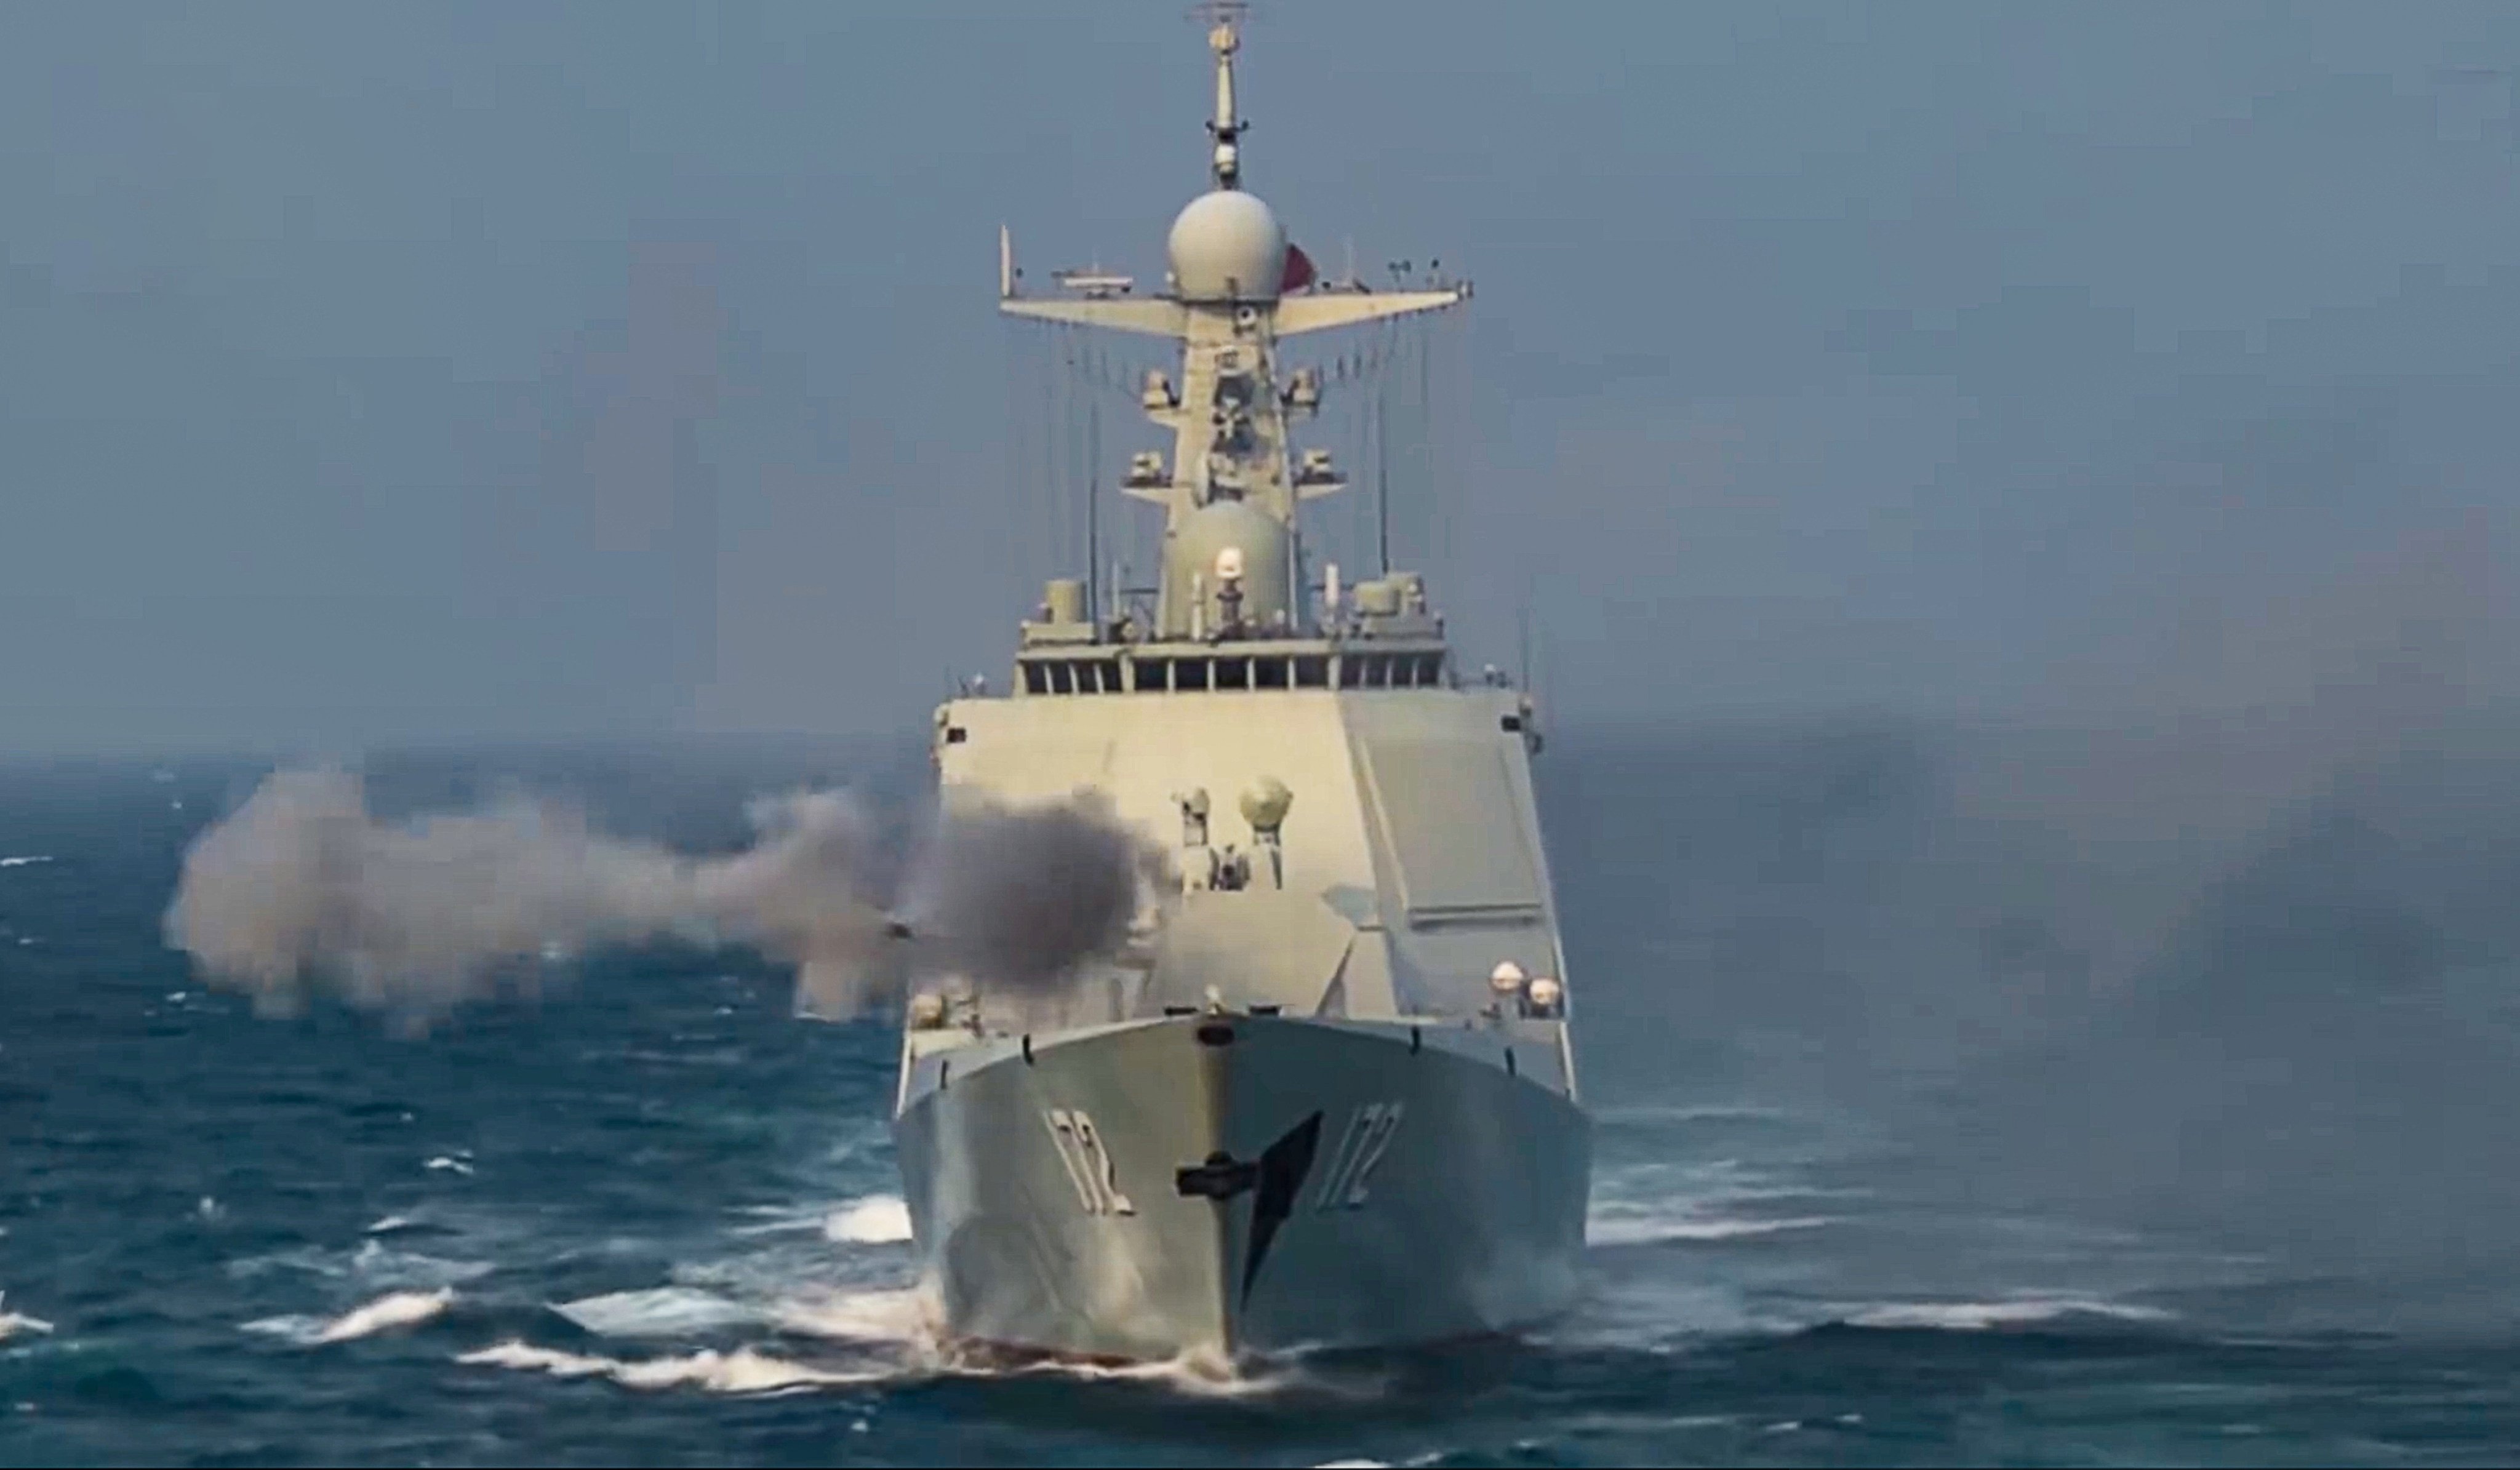 A PLA Navy destroyer takes part in the drills in the South China Sea. Photo: CCTV